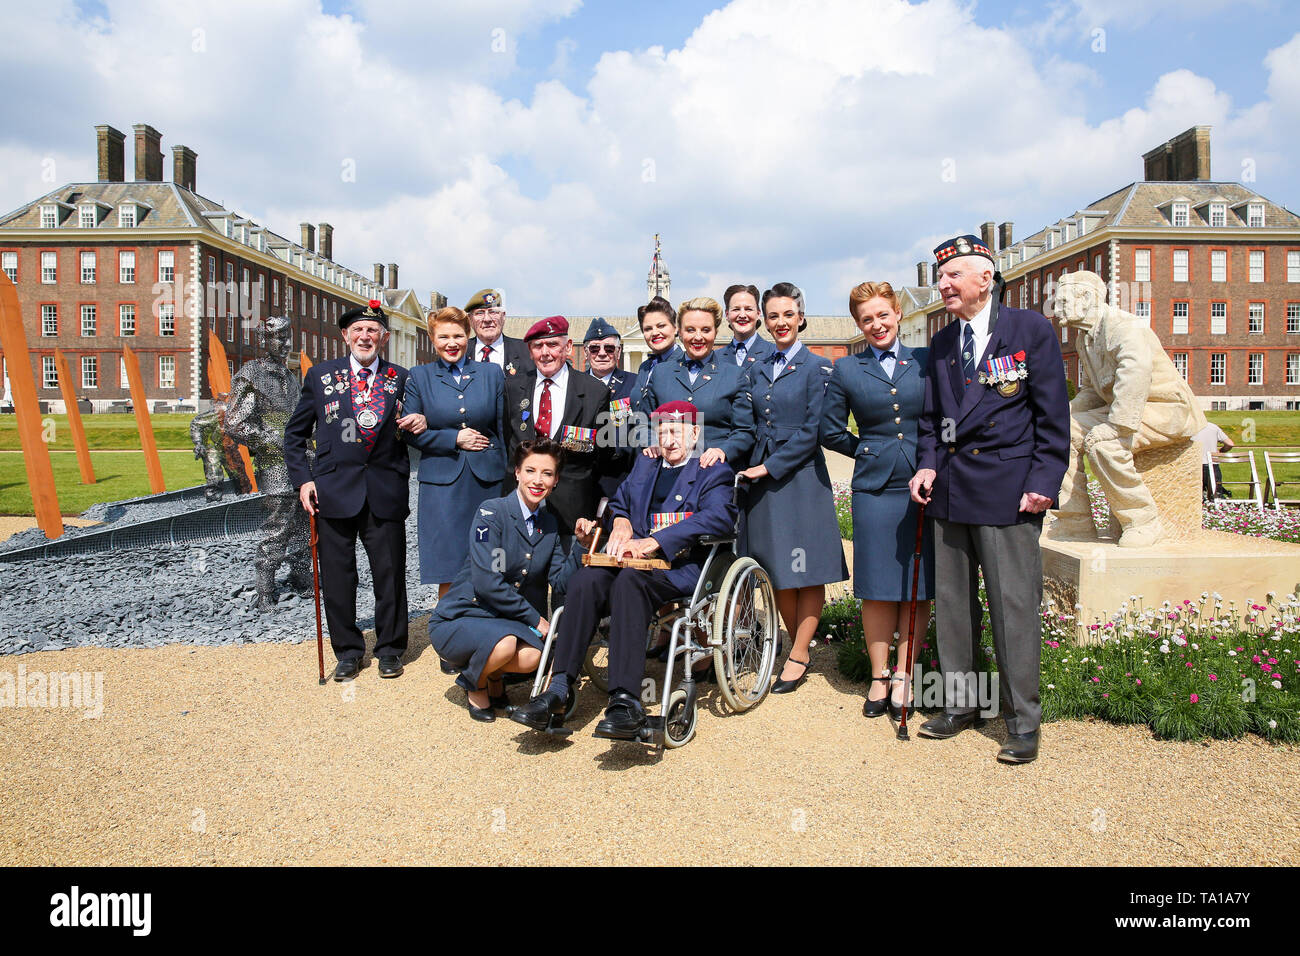 Normandy veterans seen during the Chelsea Flower Show. The Royal Horticultural Society Chelsea Flower Show is an annual garden show over five days in the grounds of the Royal Hospital Chelsea in West London. The show is open to the public from 21 May until 25 May 2019. Stock Photo